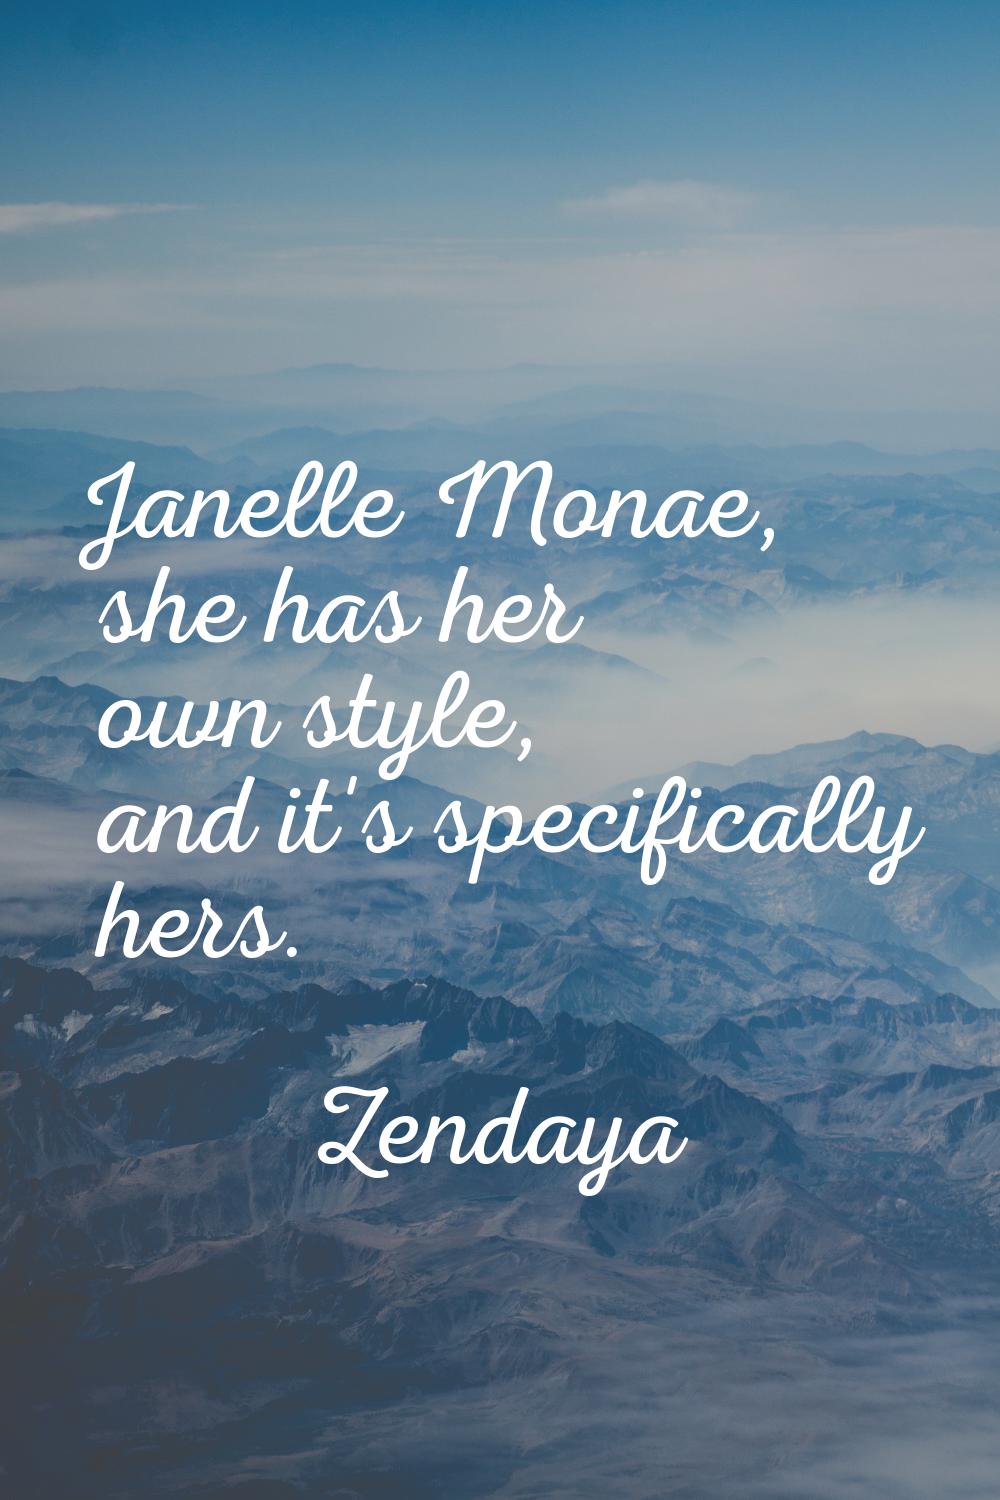 Janelle Monae, she has her own style, and it's specifically hers.